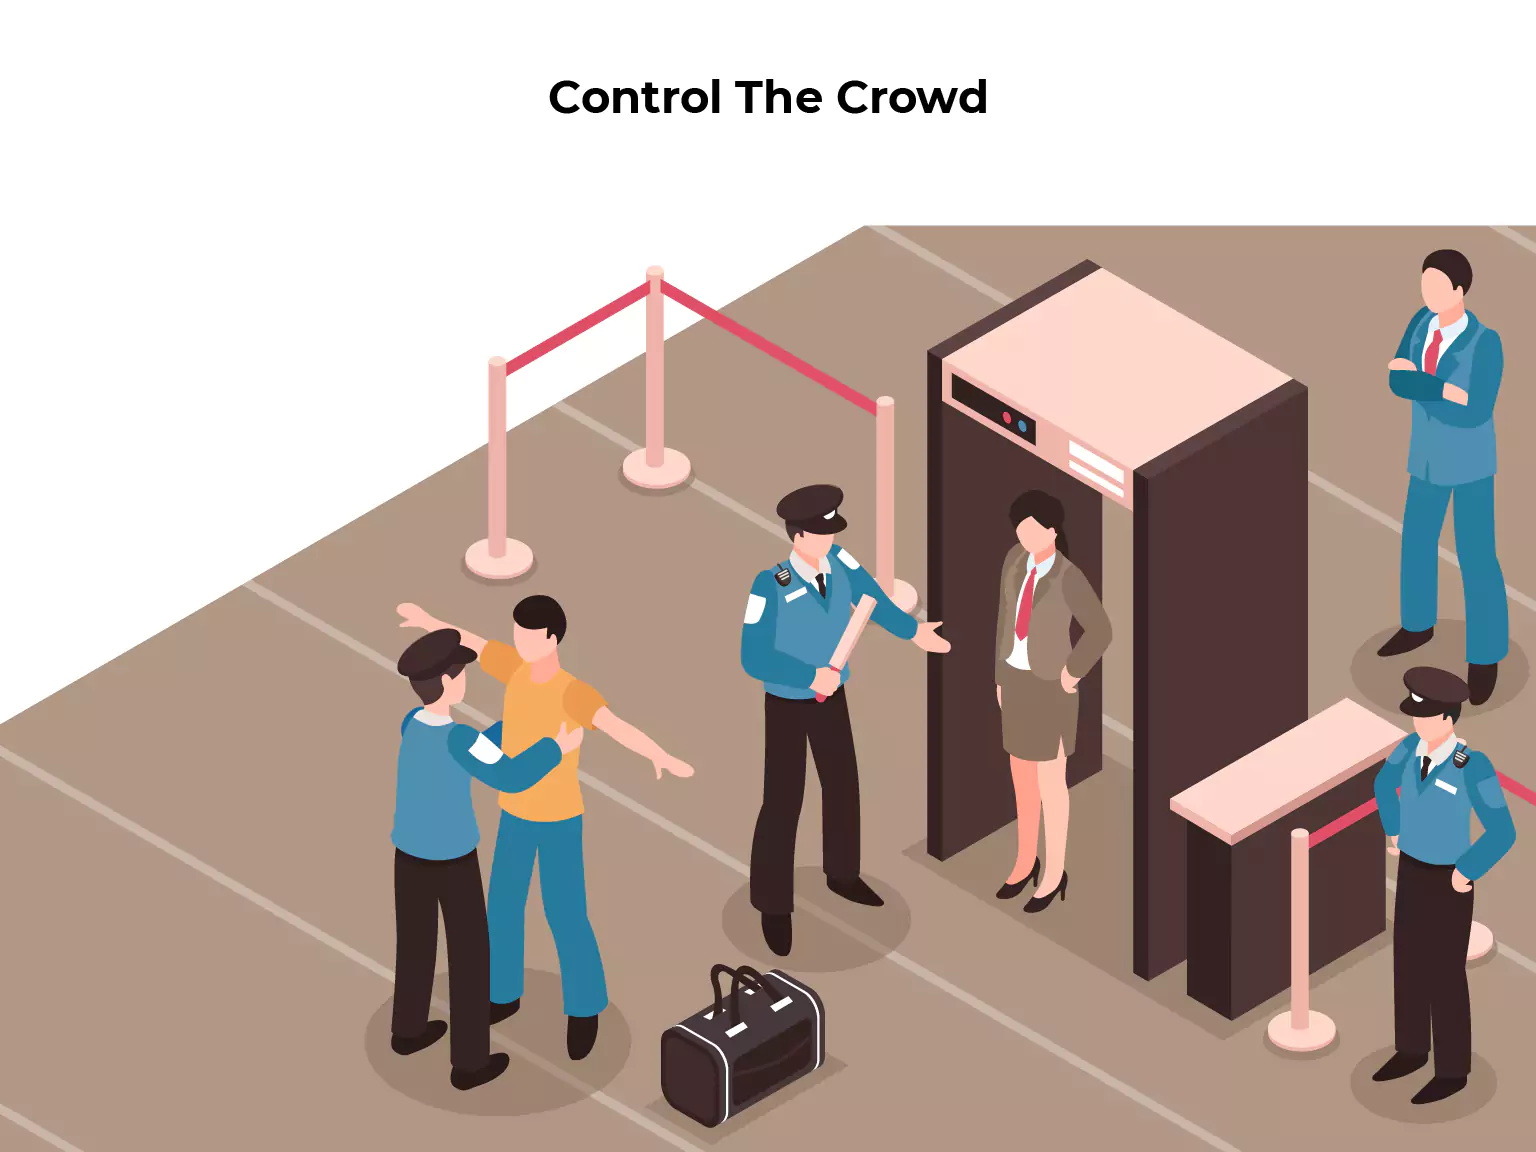 Control The Crowd